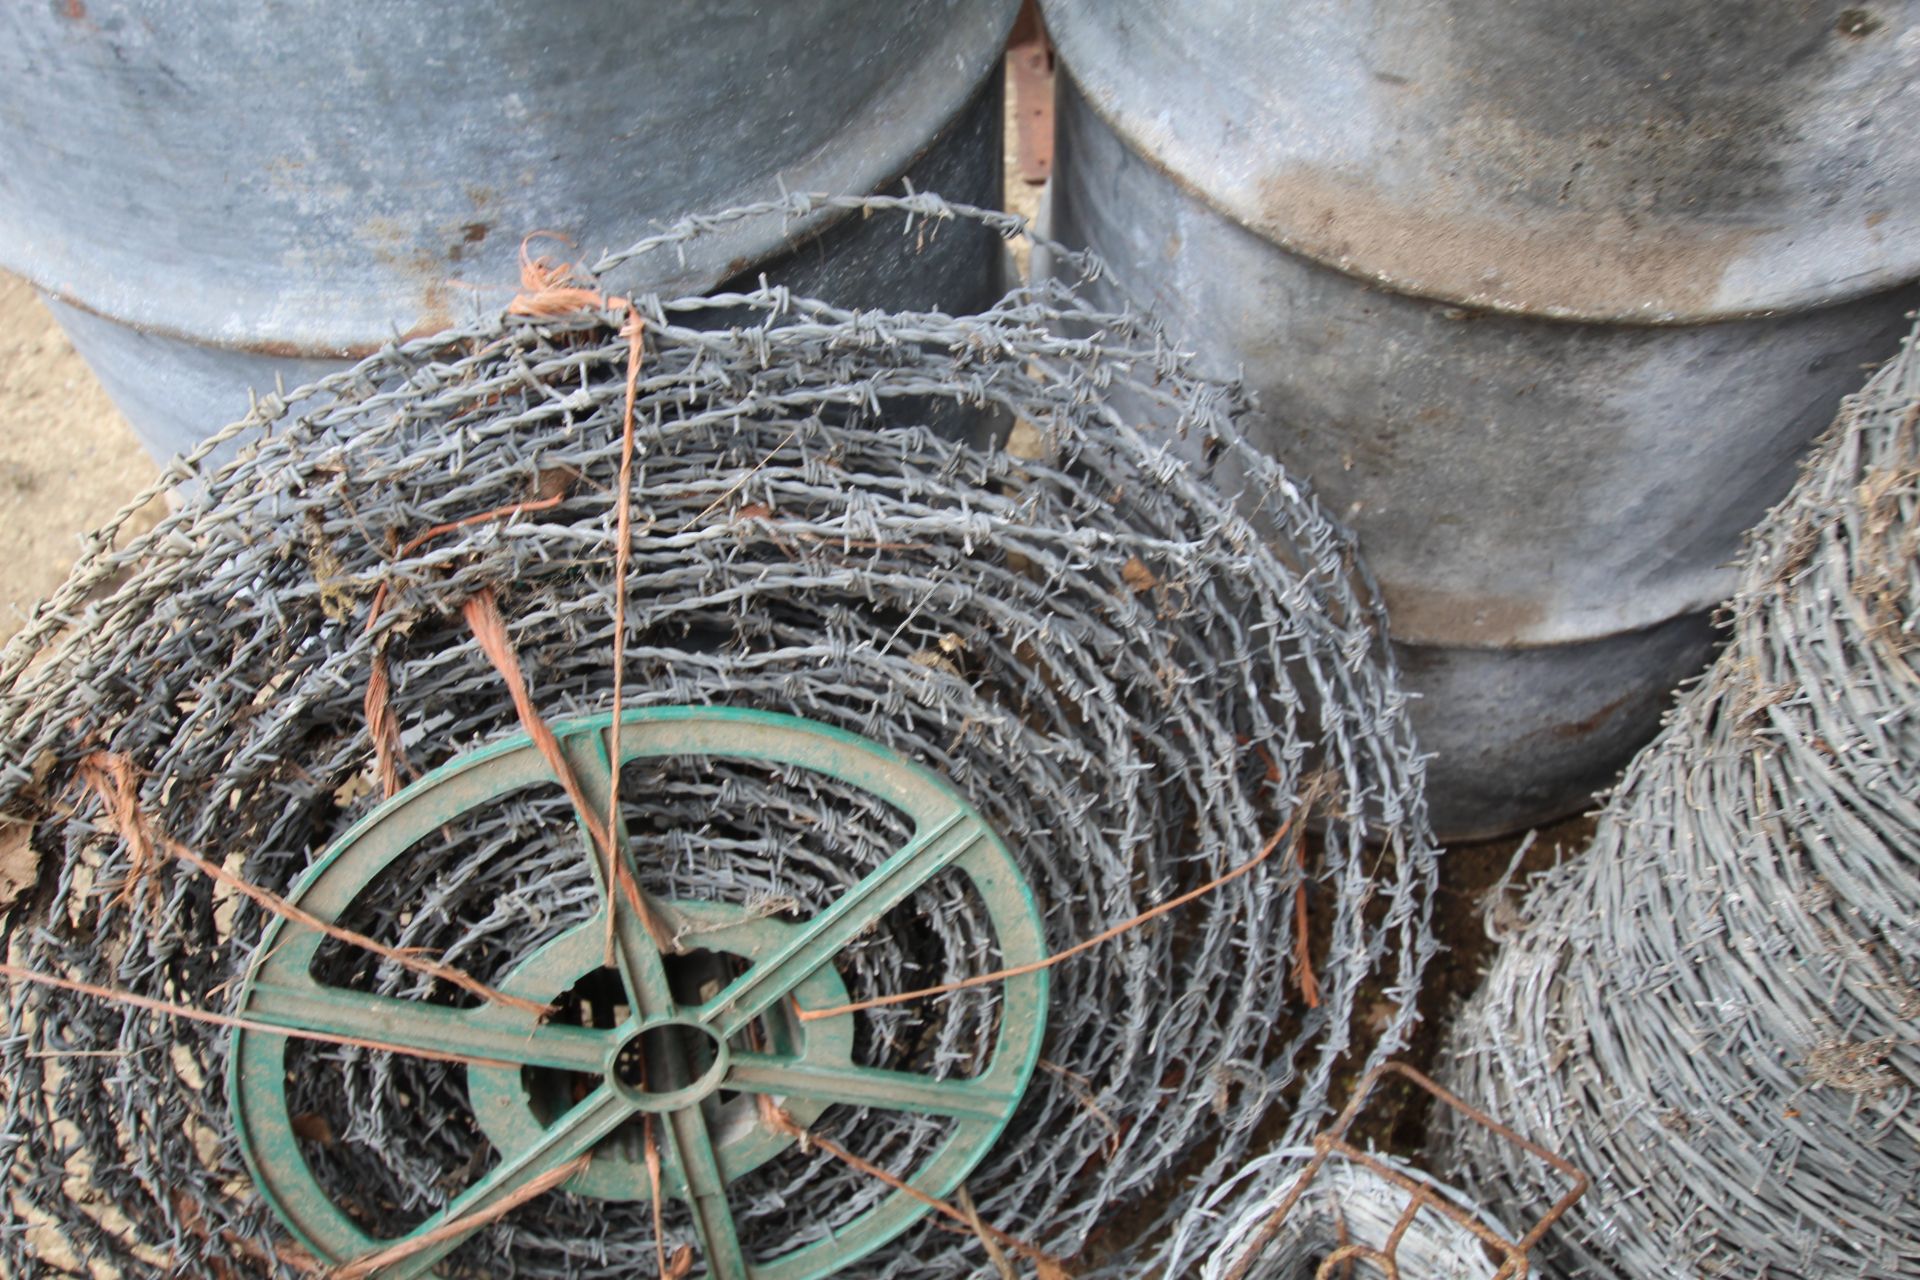 Unused and used barbed wire. - Image 3 of 3